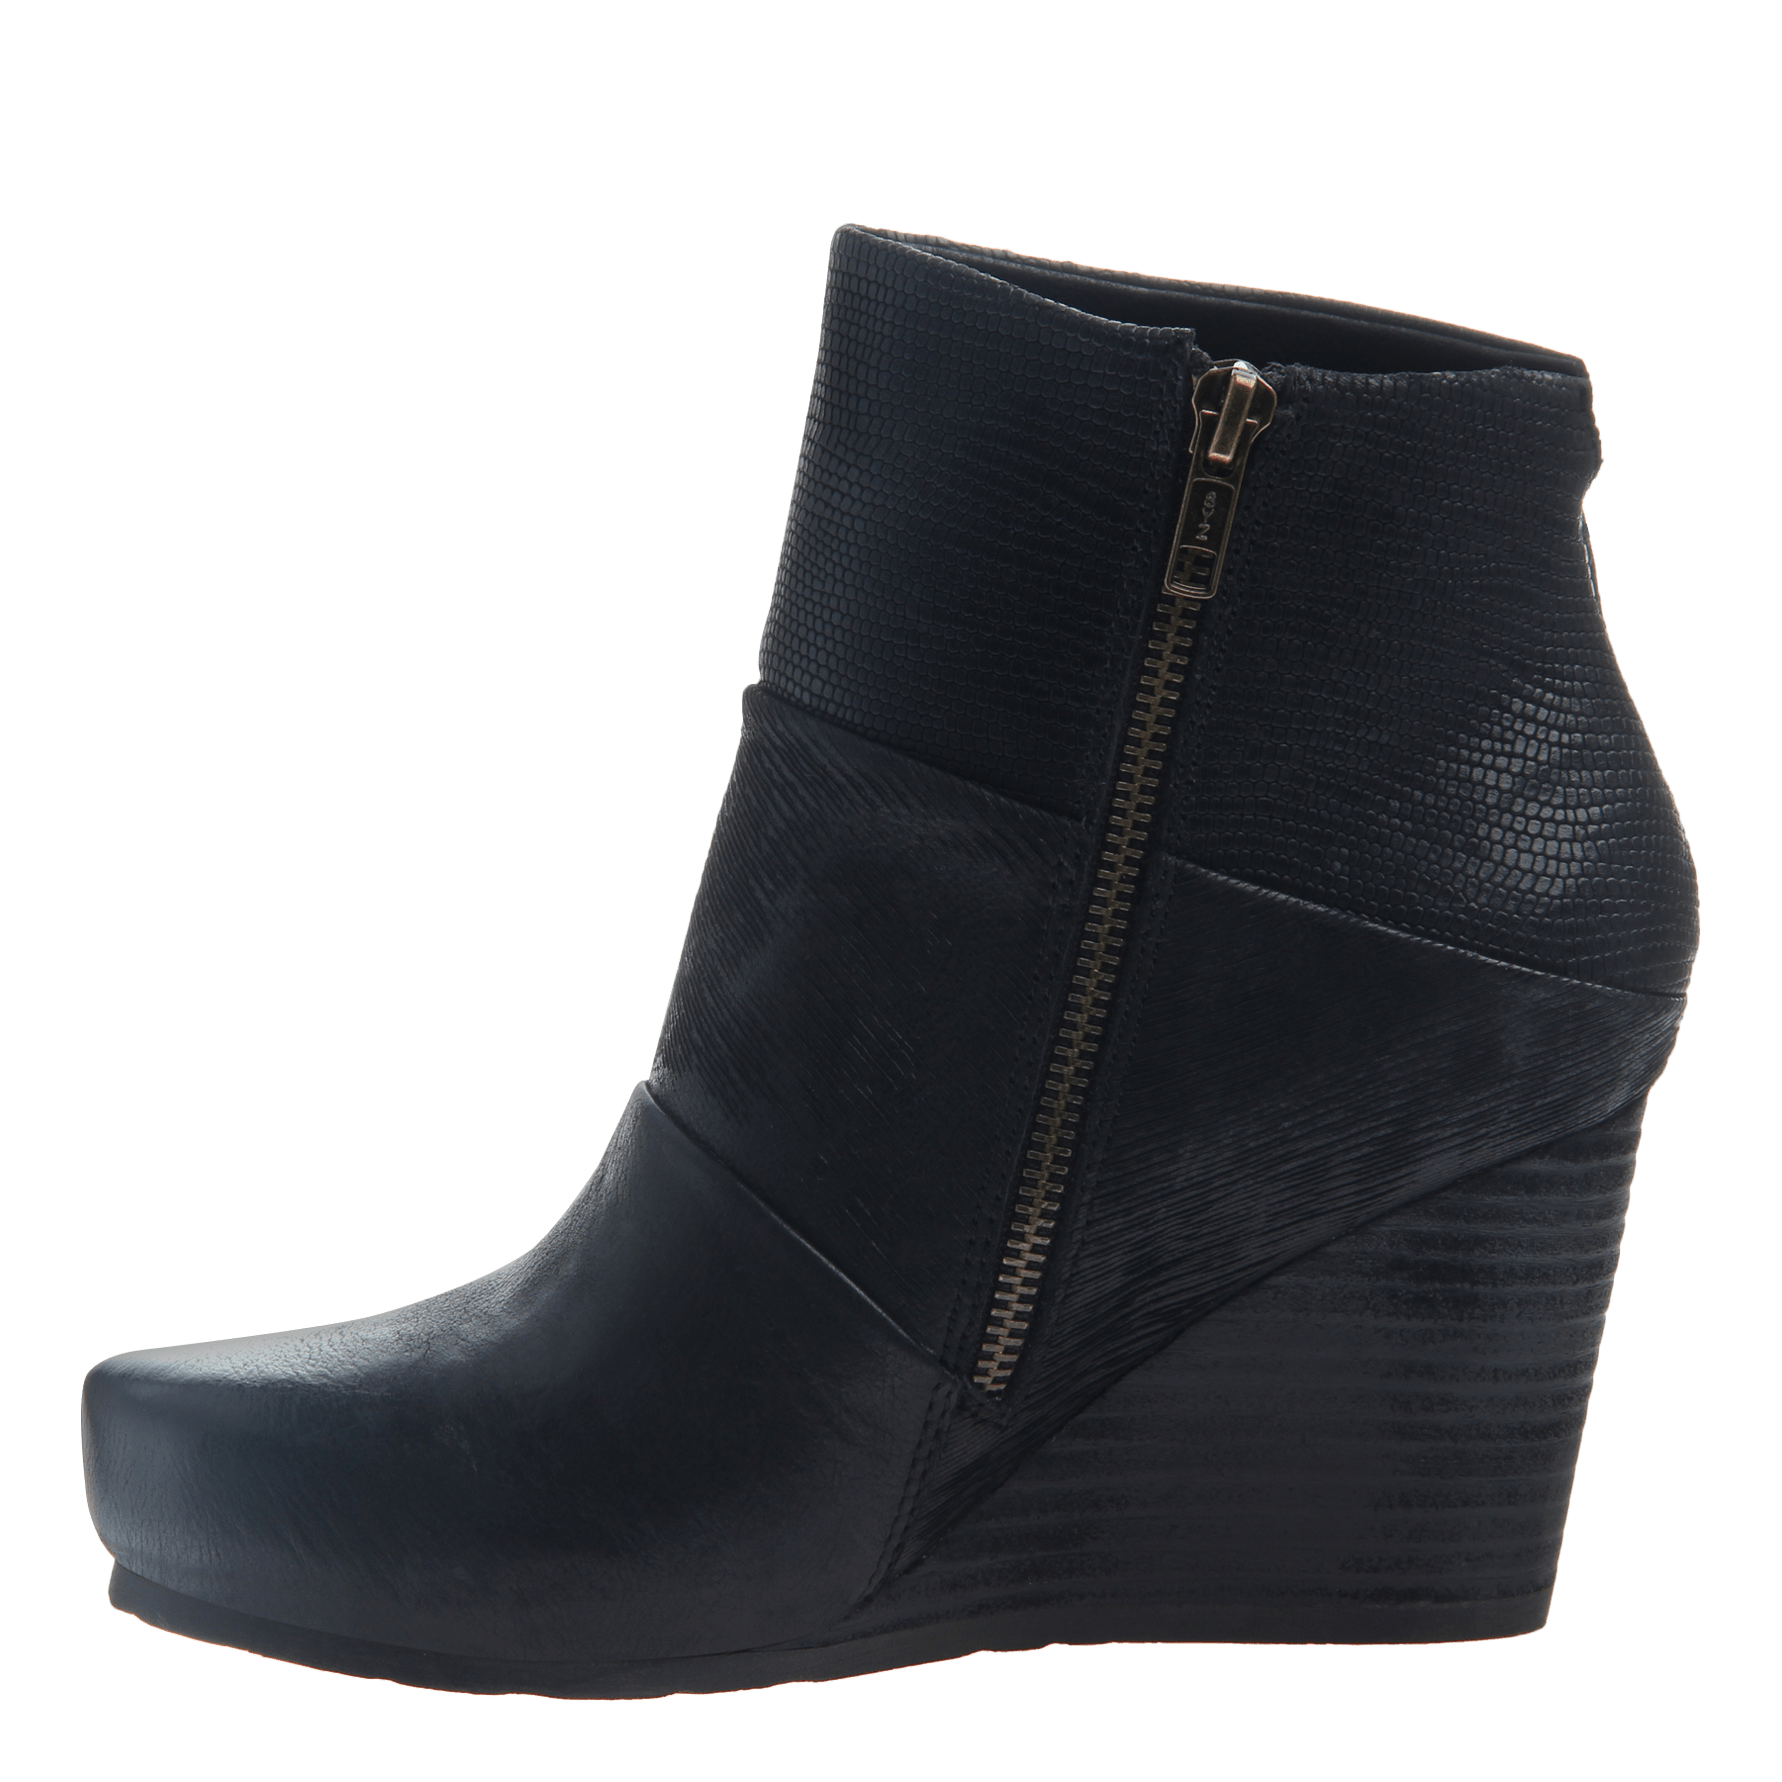 womens wedge boots black